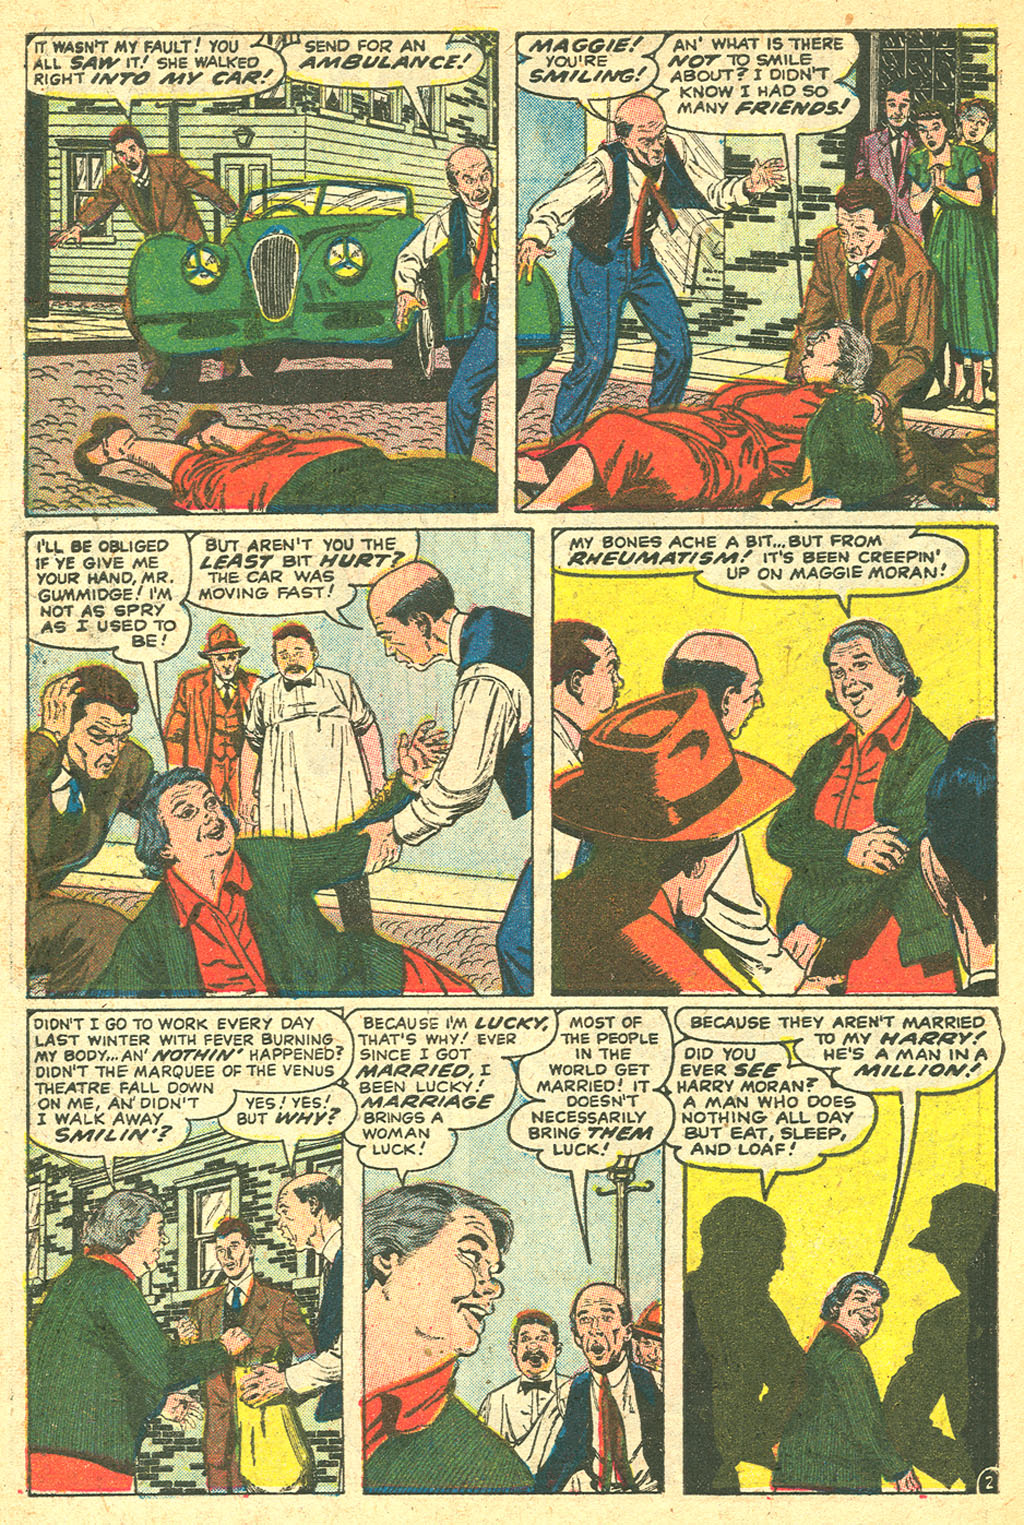 Marvel Tales (1949) 133 Page 3